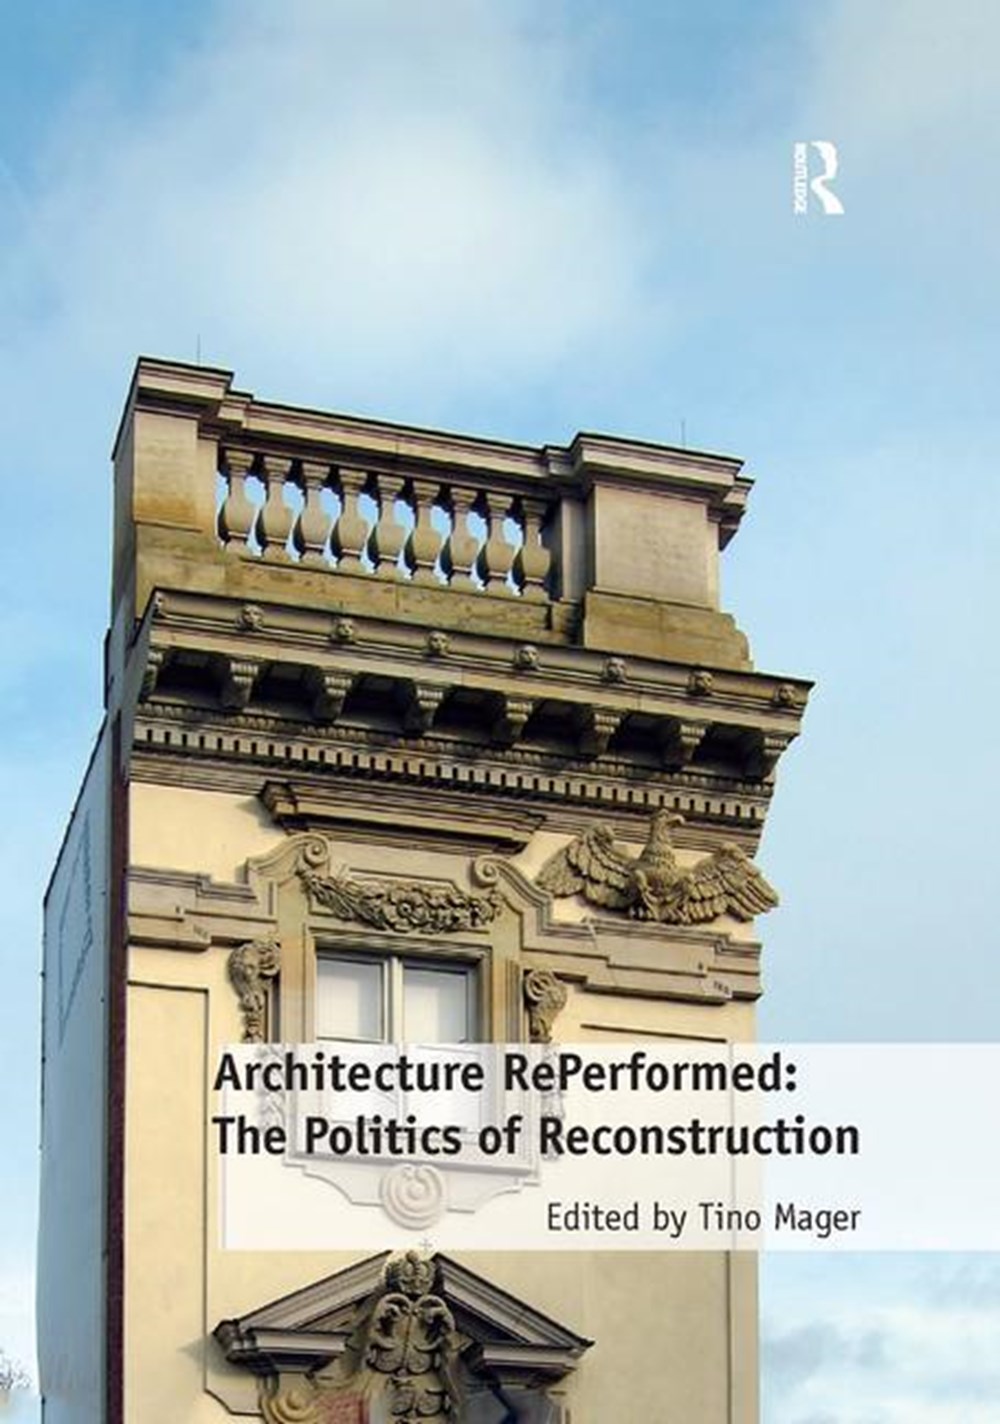 Architecture Reperformed: The Politics of Reconstruction